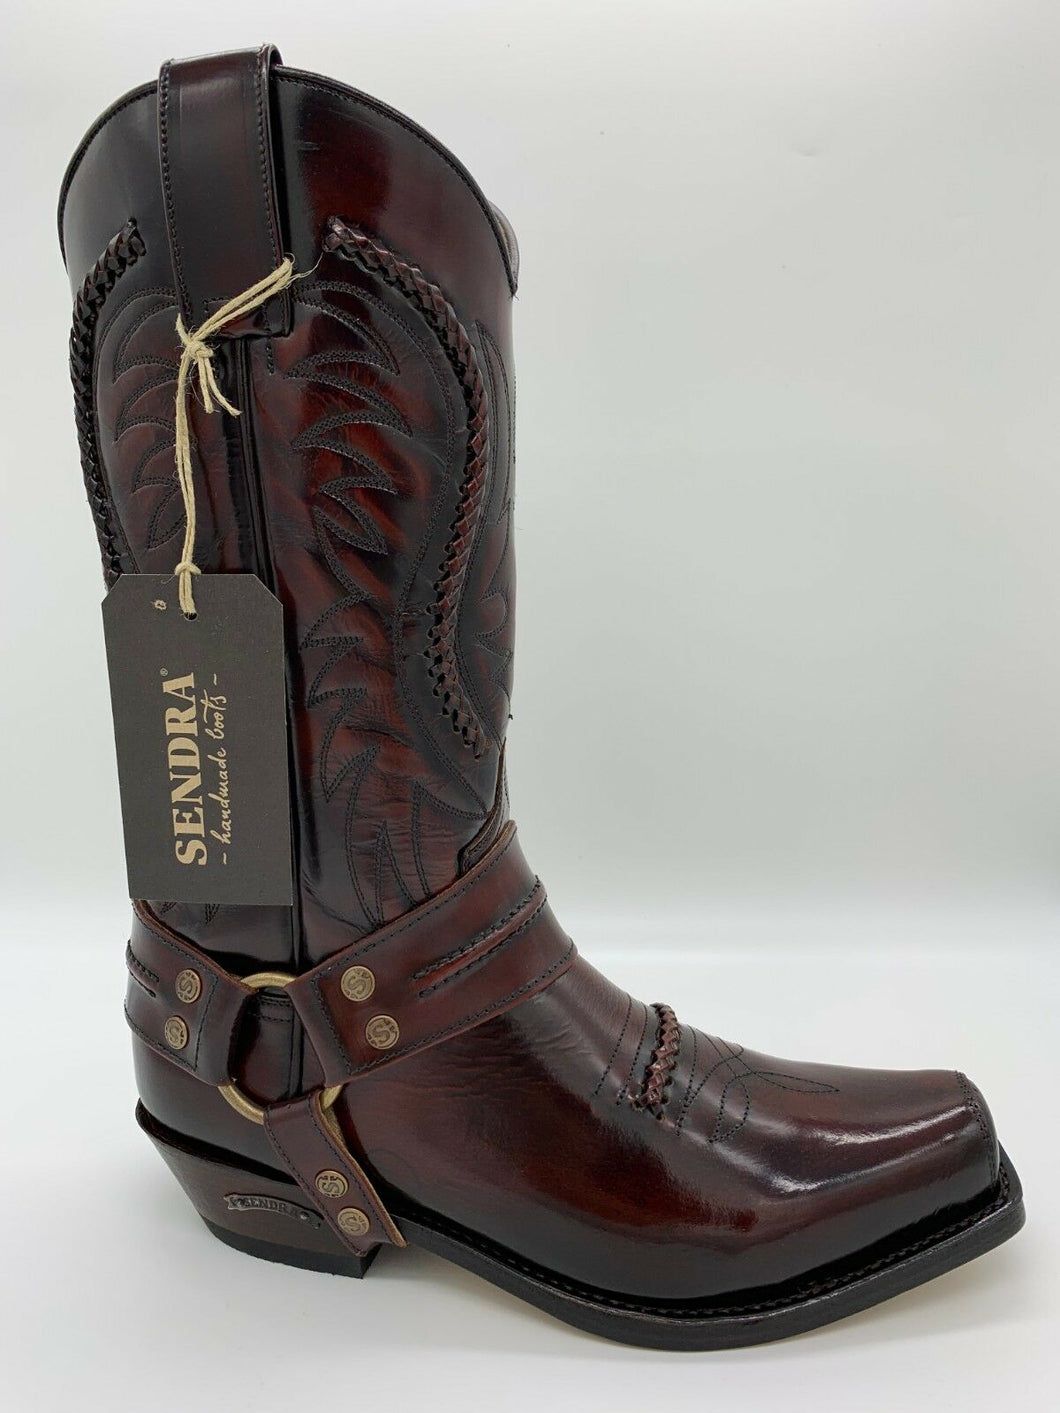 Sendra Boots Western Cowboy Boots Biker Boots Exclusive and Limited